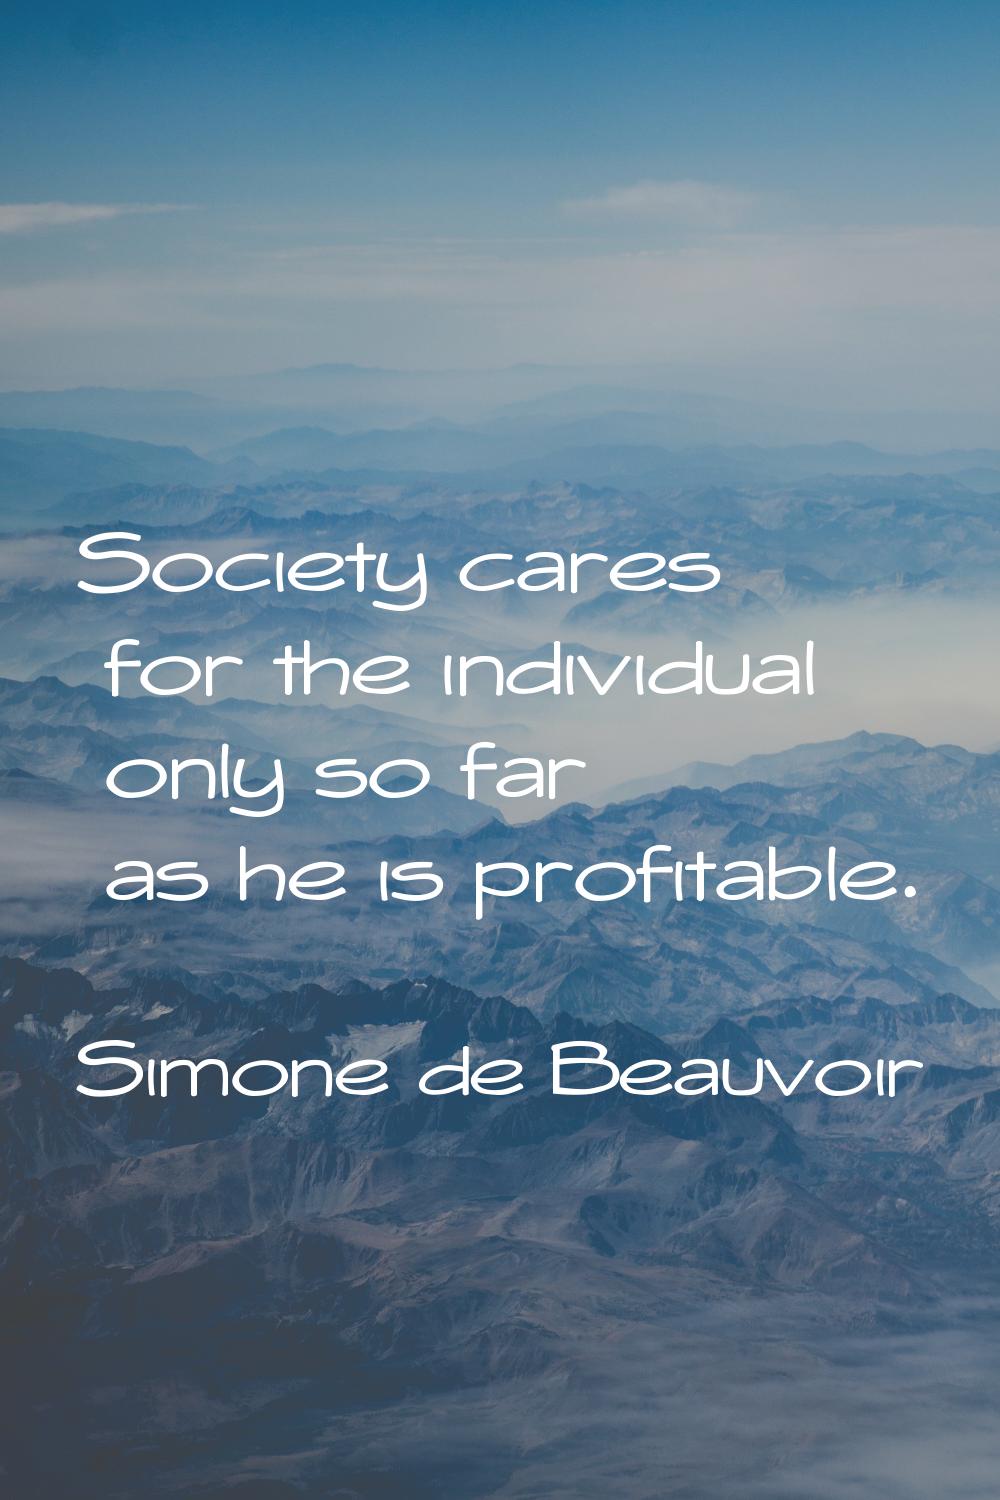 Society cares for the individual only so far as he is profitable.